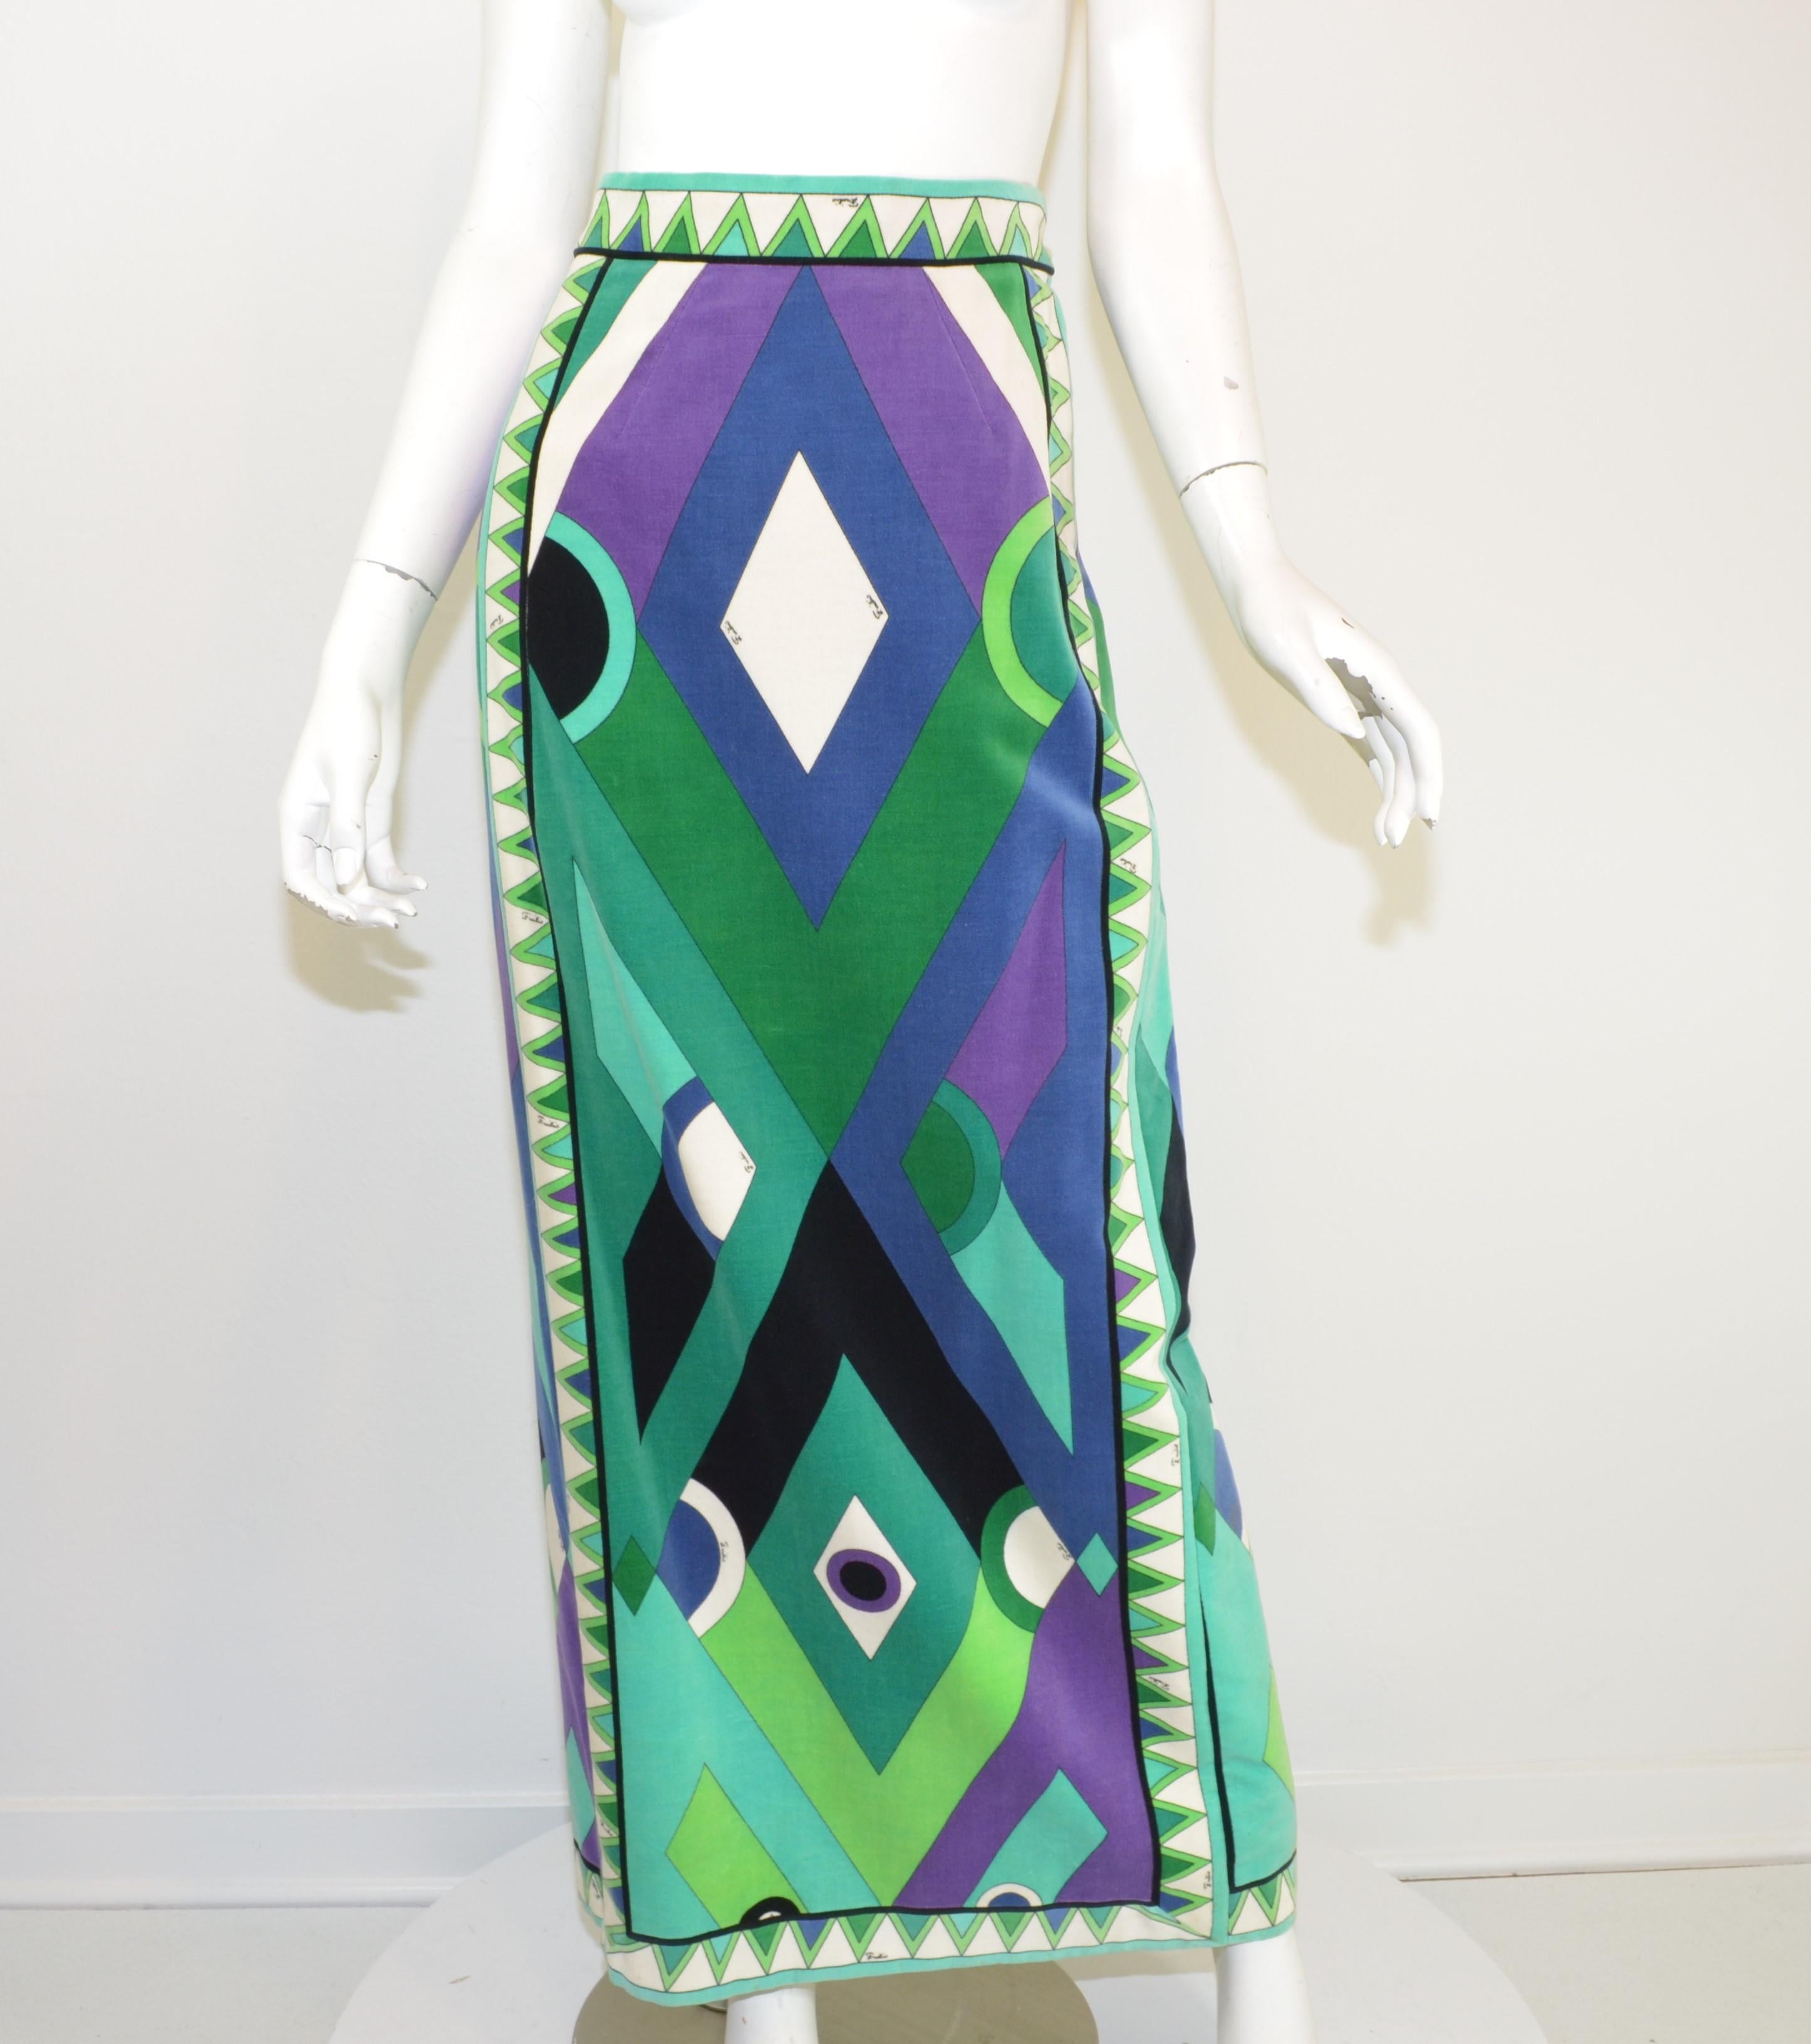 Vintage Emilio Pucci skirt is featured in a vibrant, multicolored geometric print on a velvet material. Skirt is lined and has a side zipper and snap button fastening. Labeled size 12, made in Italy.

Measurements:
Waist 26”
Hips 36”
Length 43”